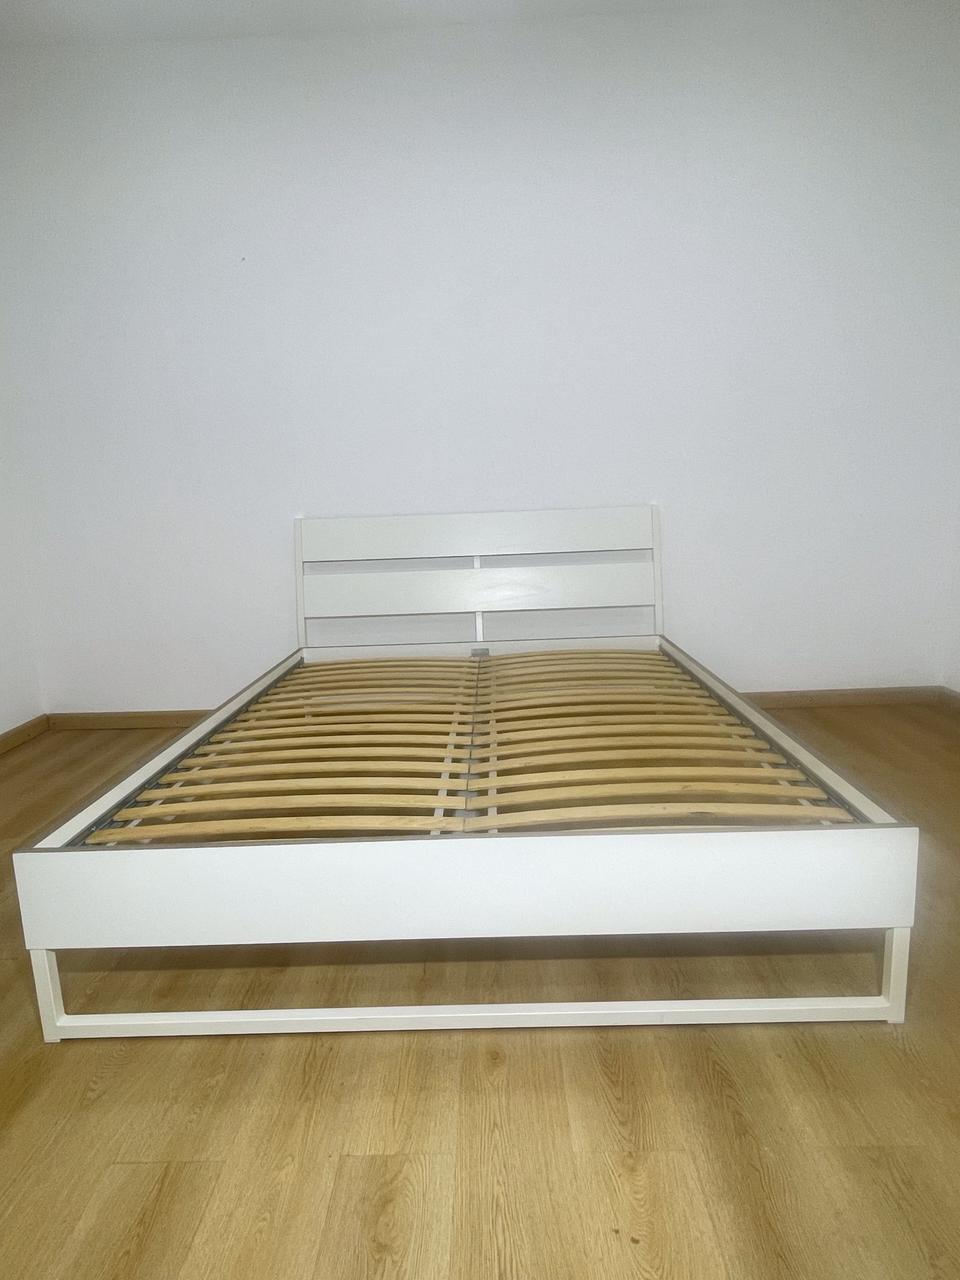 IKEA queen size tyrsil bed frame